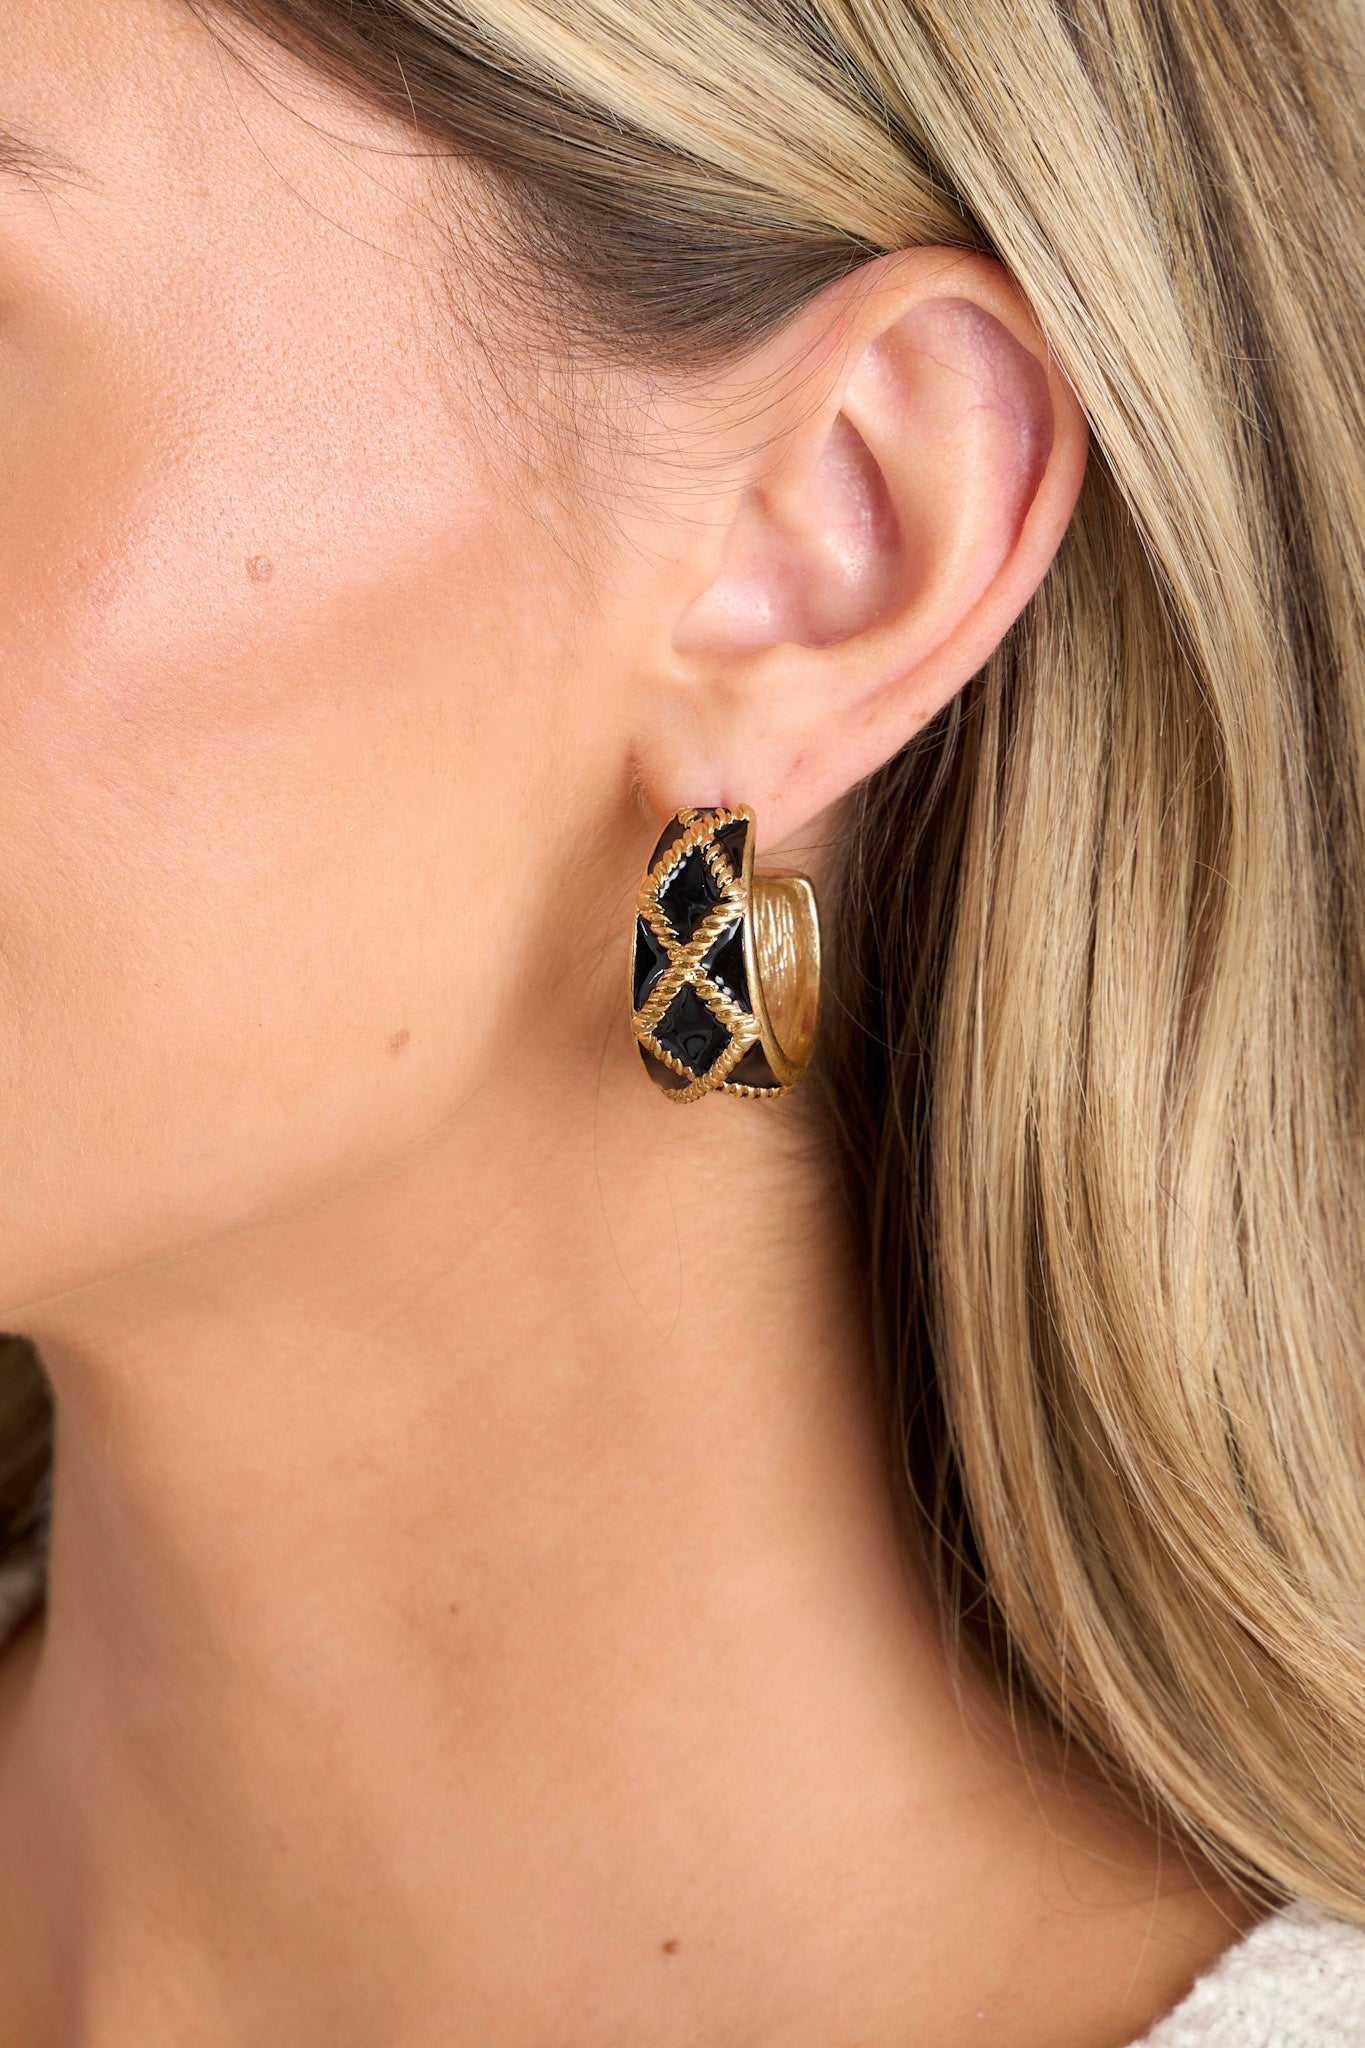 Close-up view of these black earrings that feature an incomplete hoop design, a gold textured design, and secure post backings.